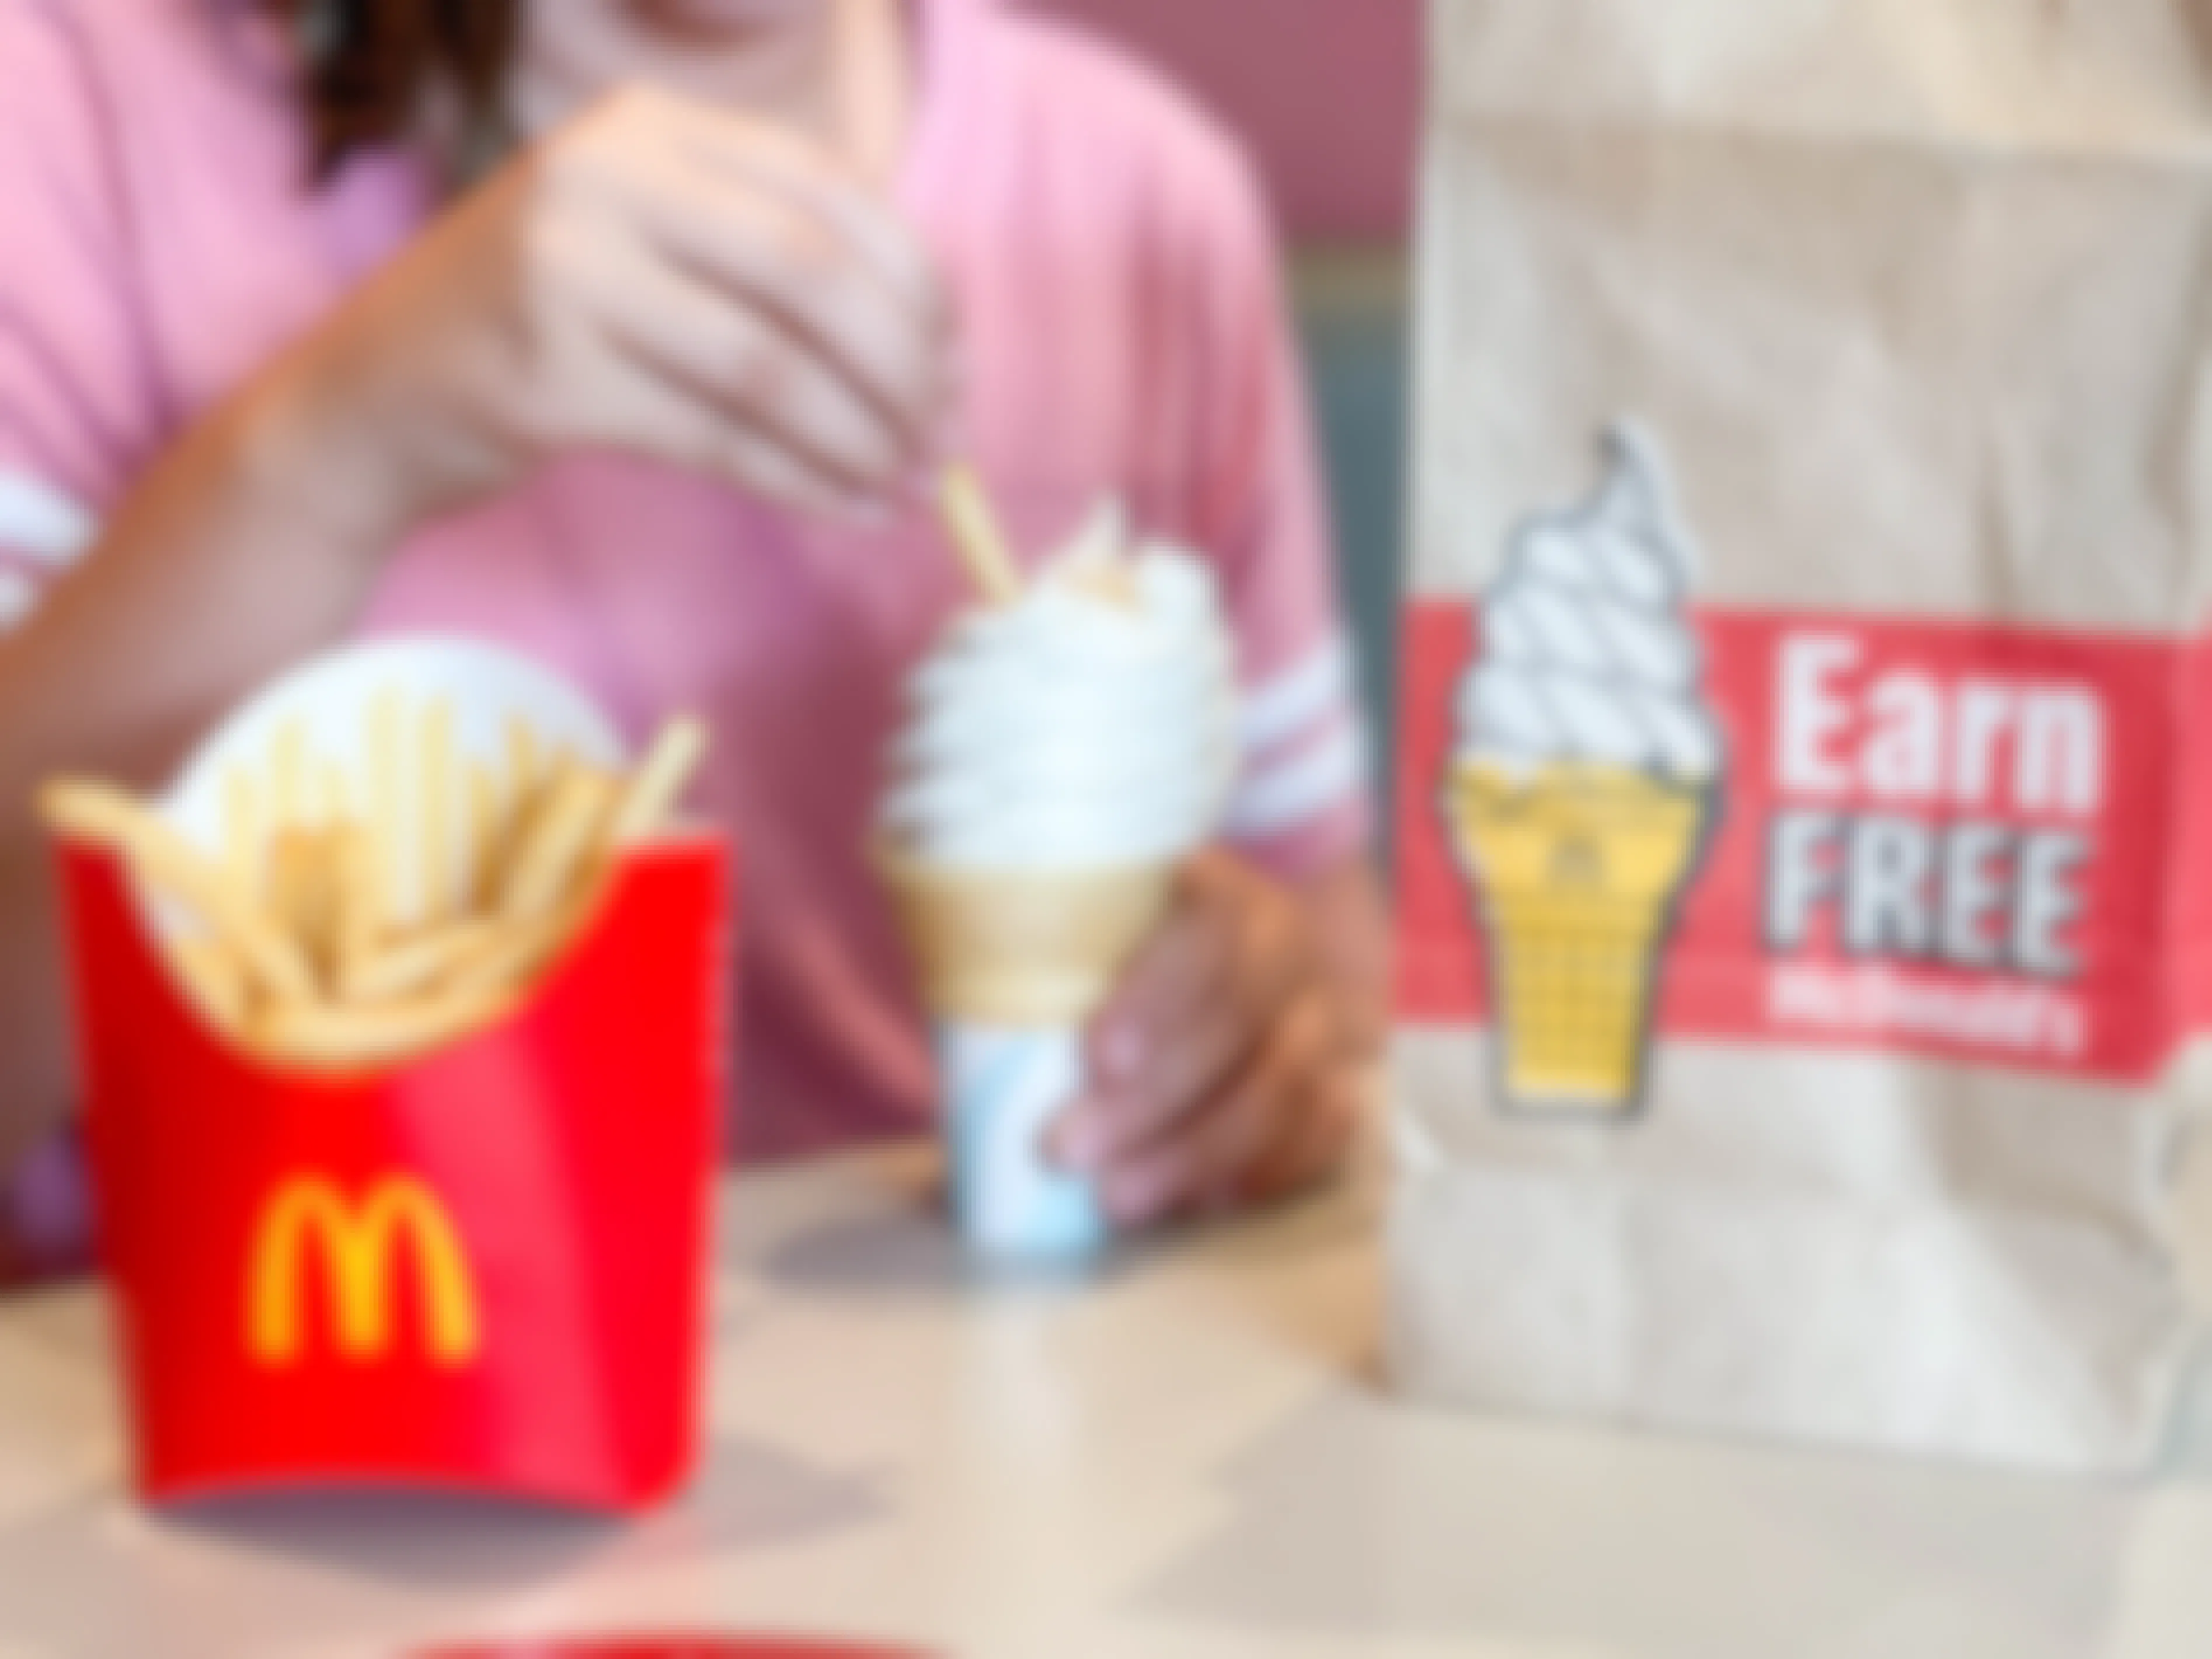 10 Things You Need to Know to Get Free Fast Food